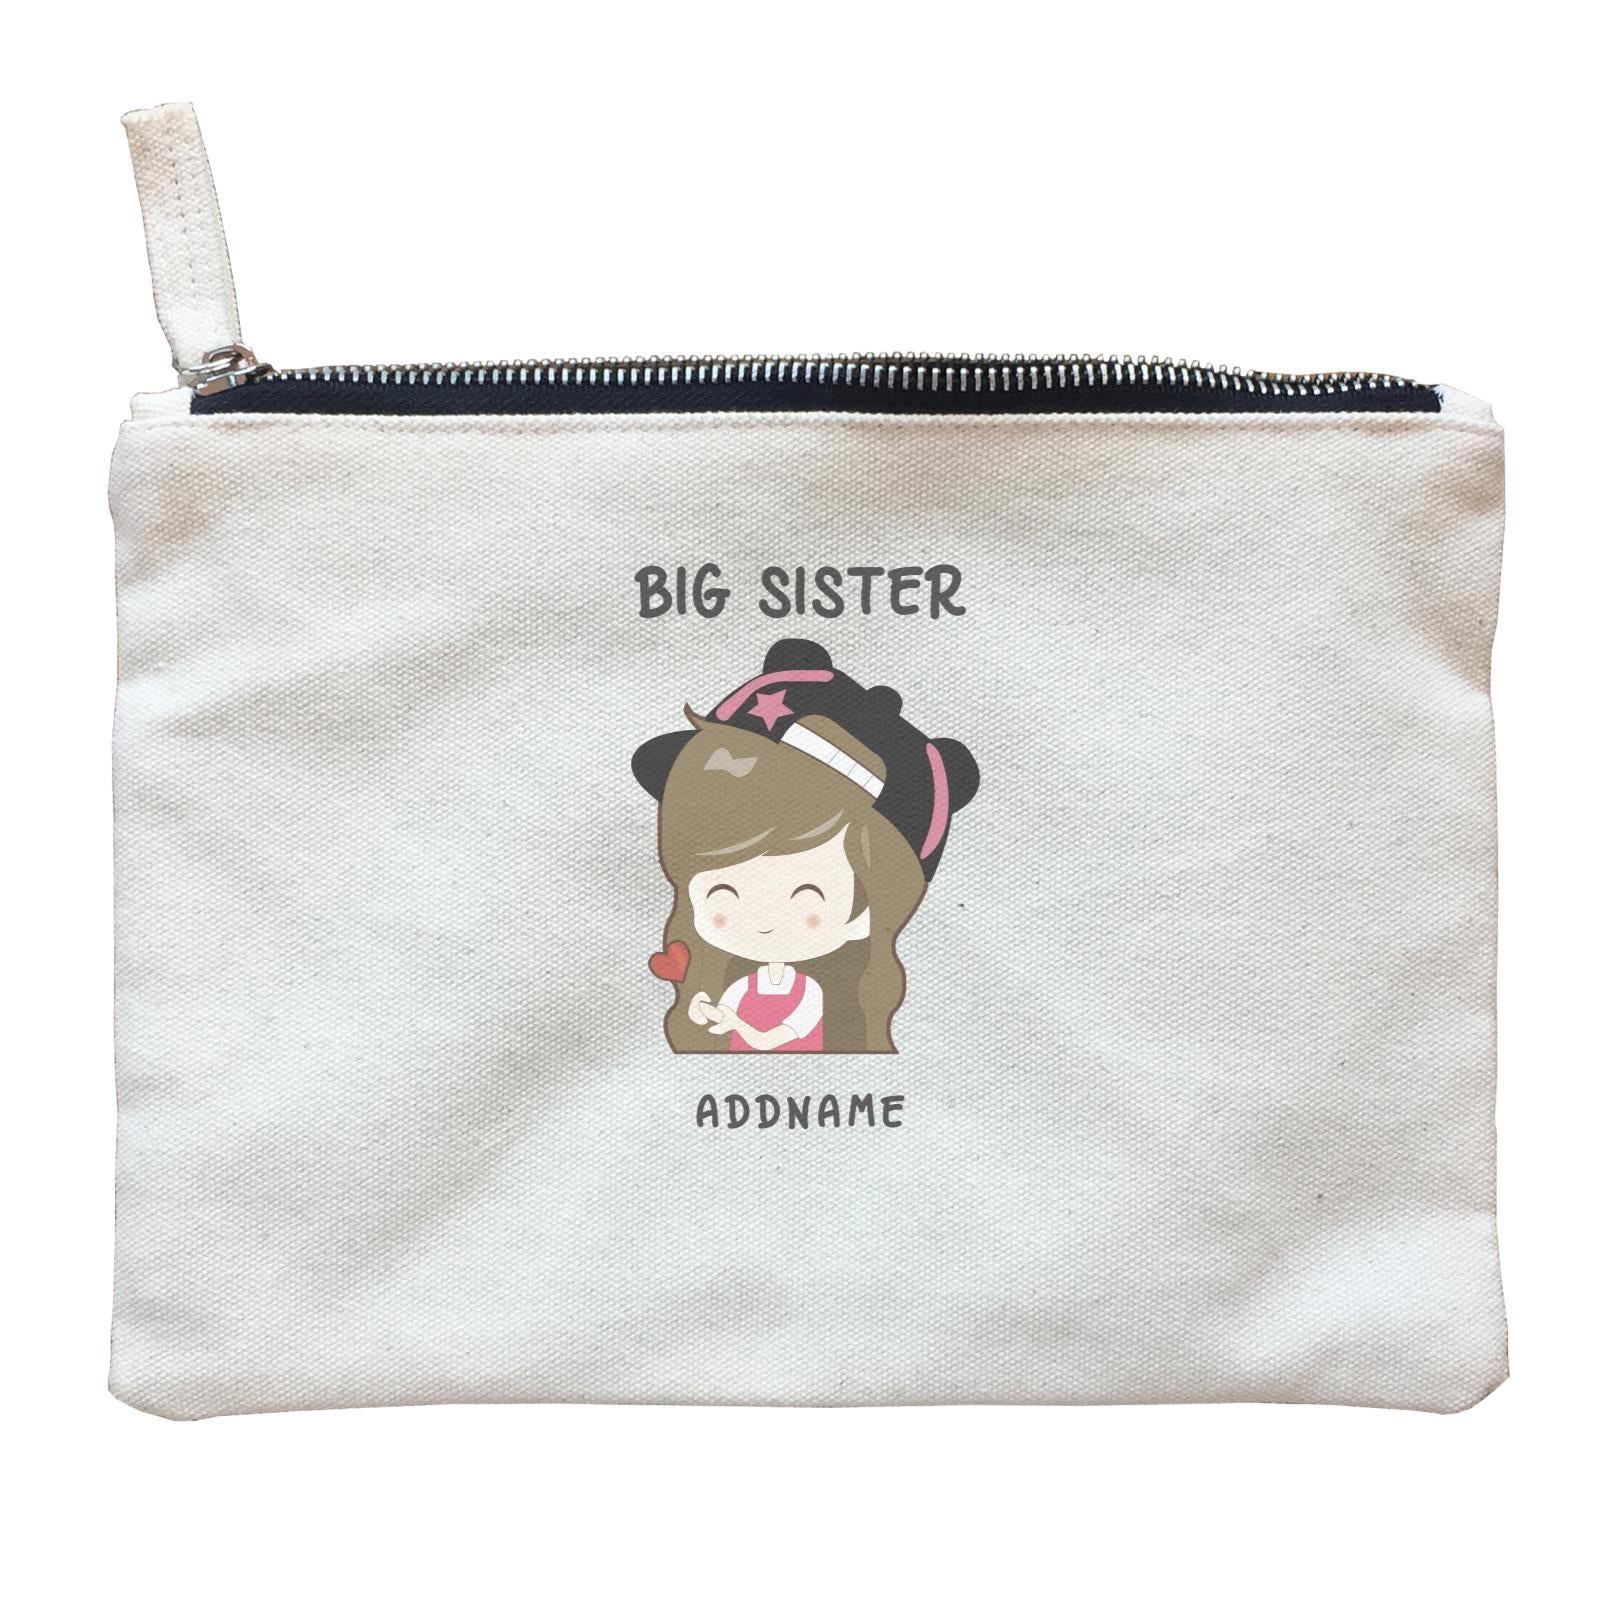 My Lovely Family Series Big Sister Addname Zipper Pouch